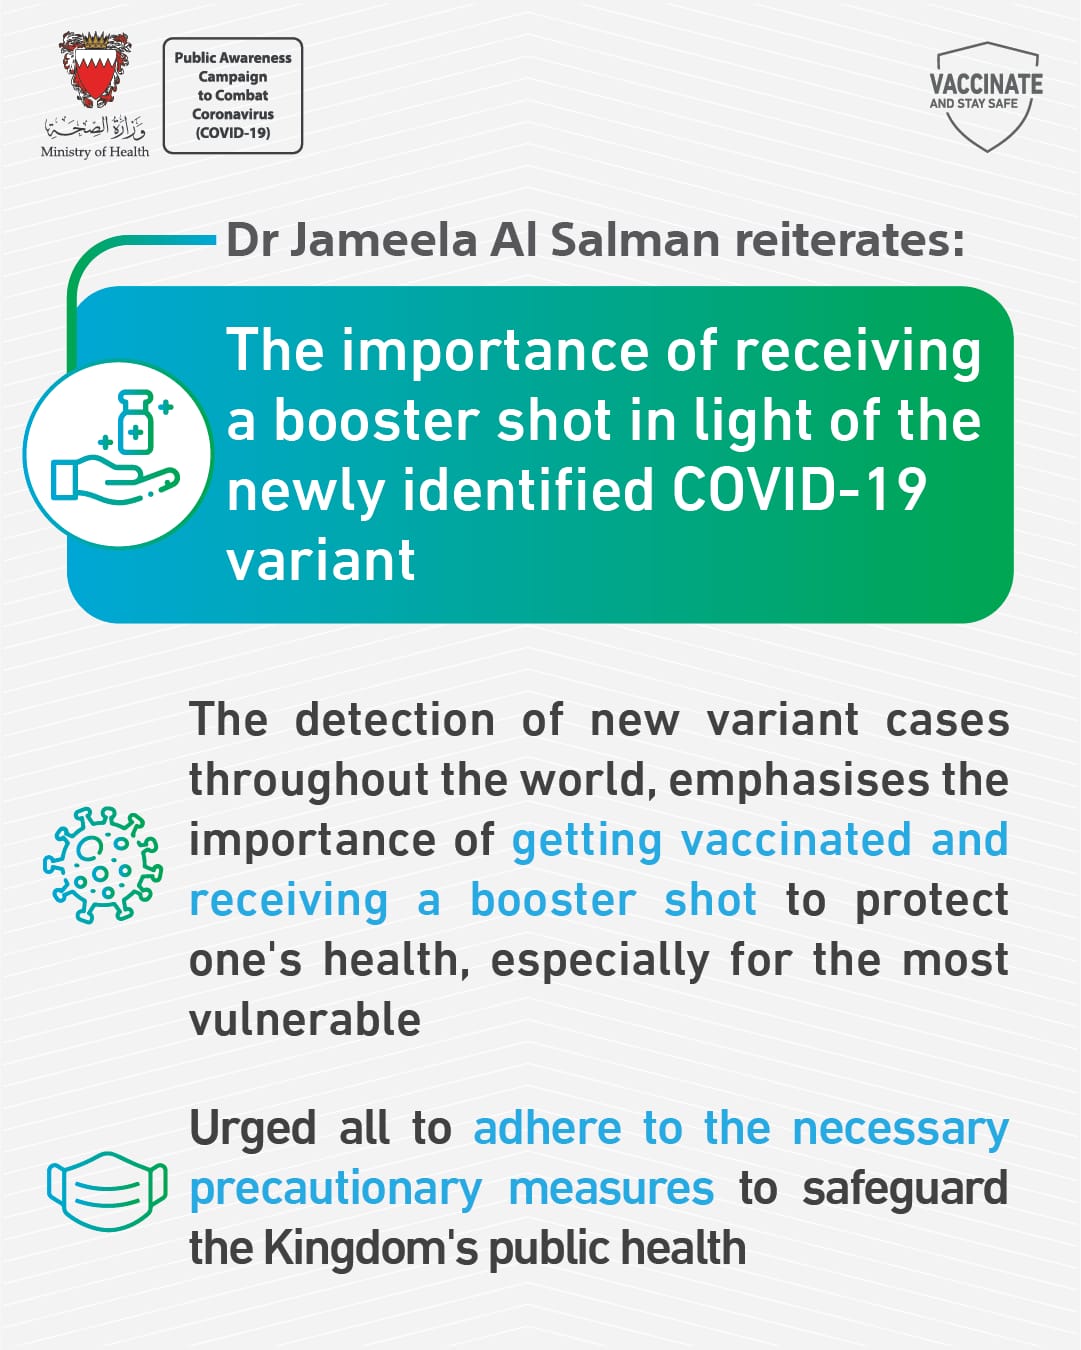 Dr Al Salman reiterates the importance of receiving a booster shot in light of the newly identified COVID-19 variant: 27 November 2021